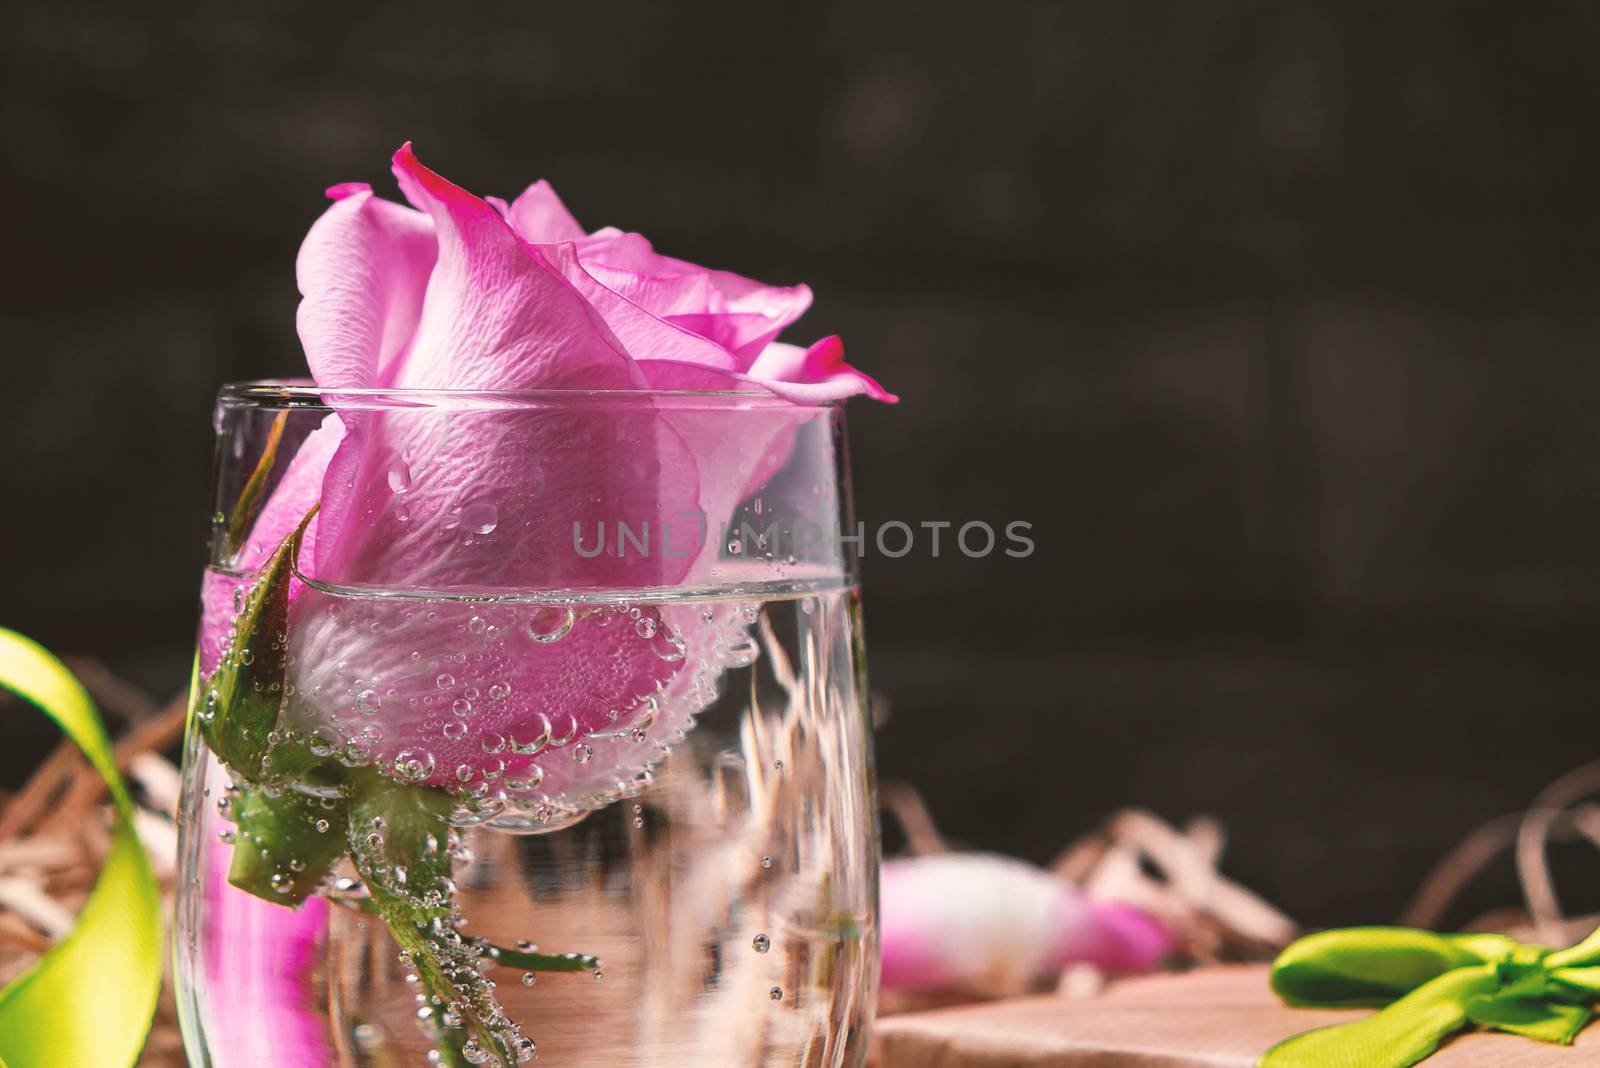 Pink rose in a glass with water and decorations on the table.